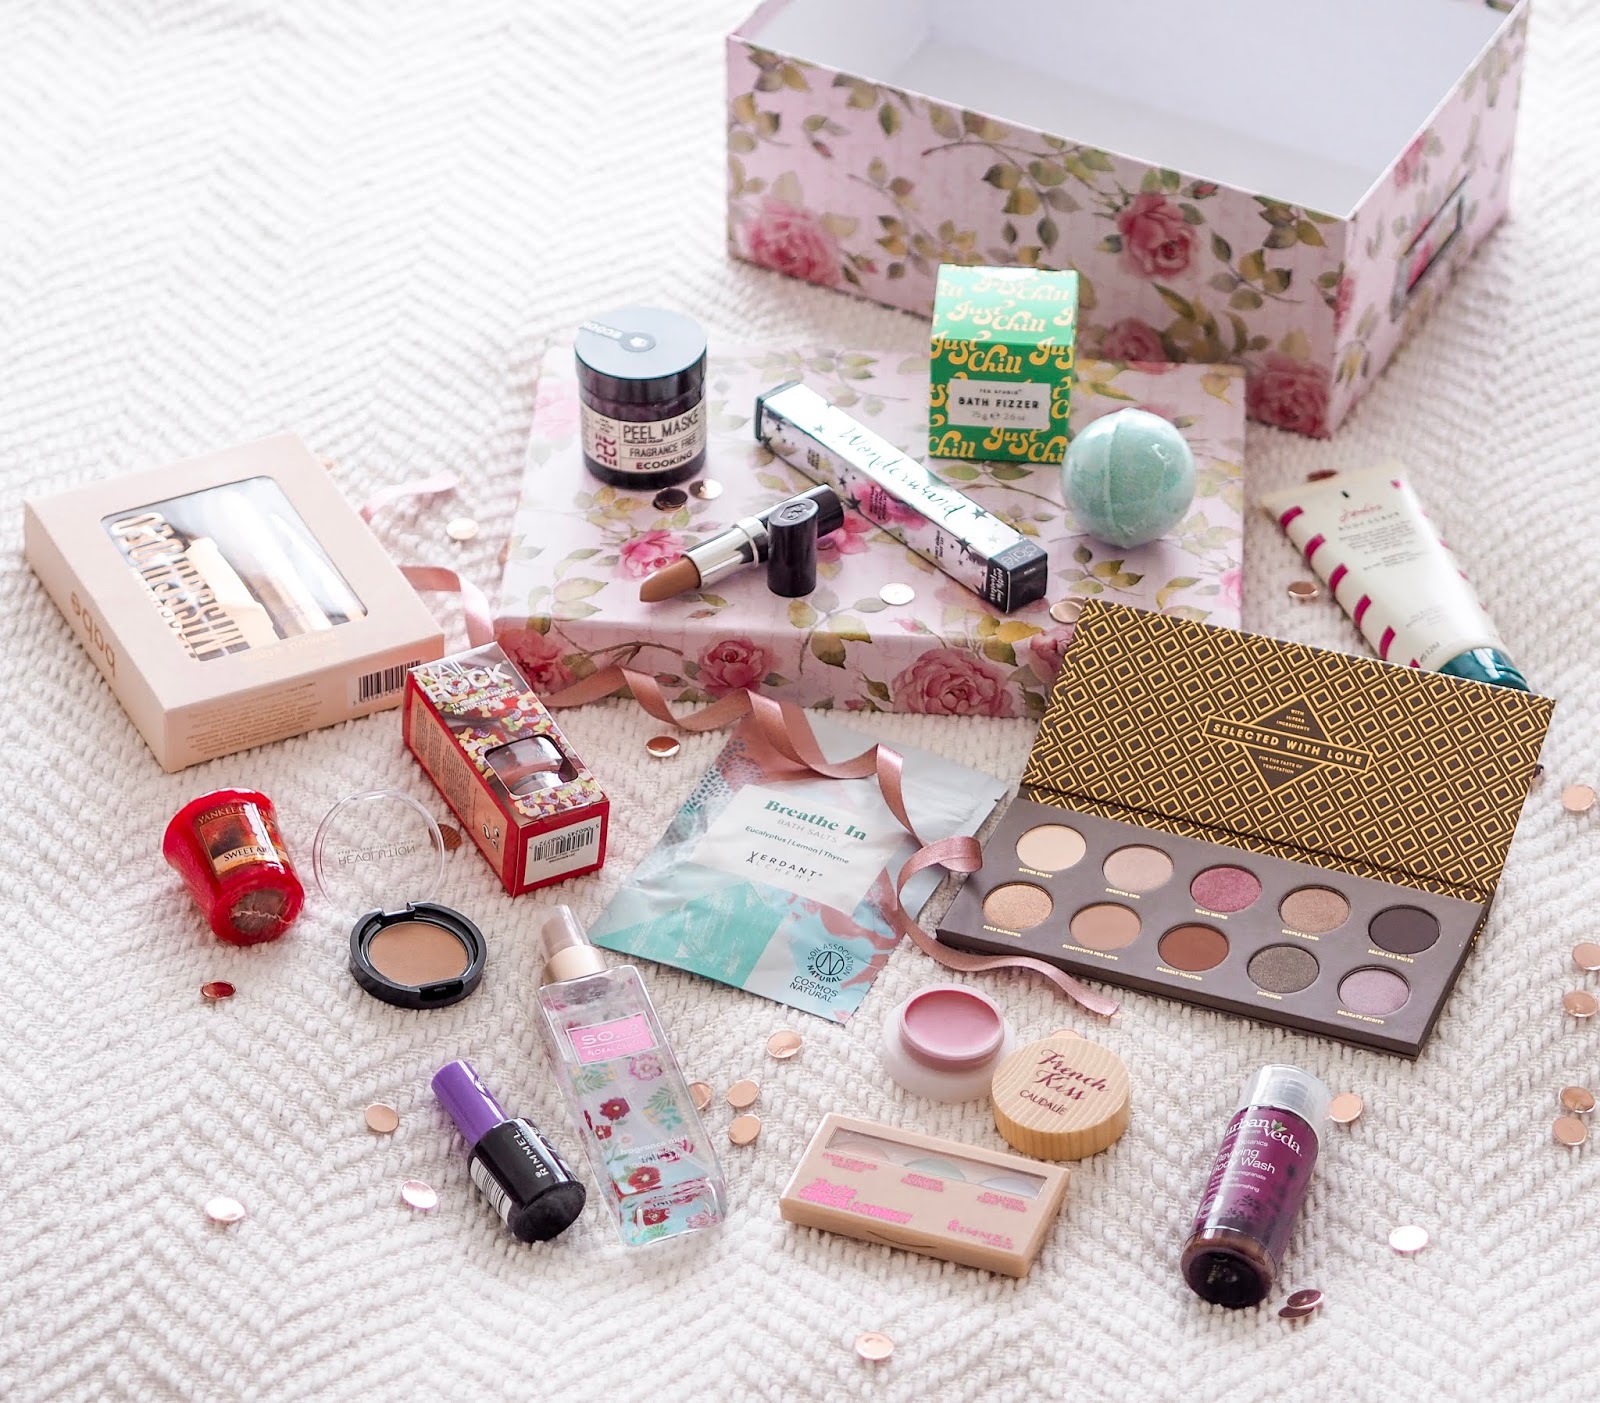 Mega May Day Giveaway!, UK Blogger, UK Giveaway, Competition, Beauty Giveaway, Makeup Giveaway, Katie Kirk Loves, Make Up Blogger, Beauty Blogger, Win This, Prize Draw, Blogger Giveaway